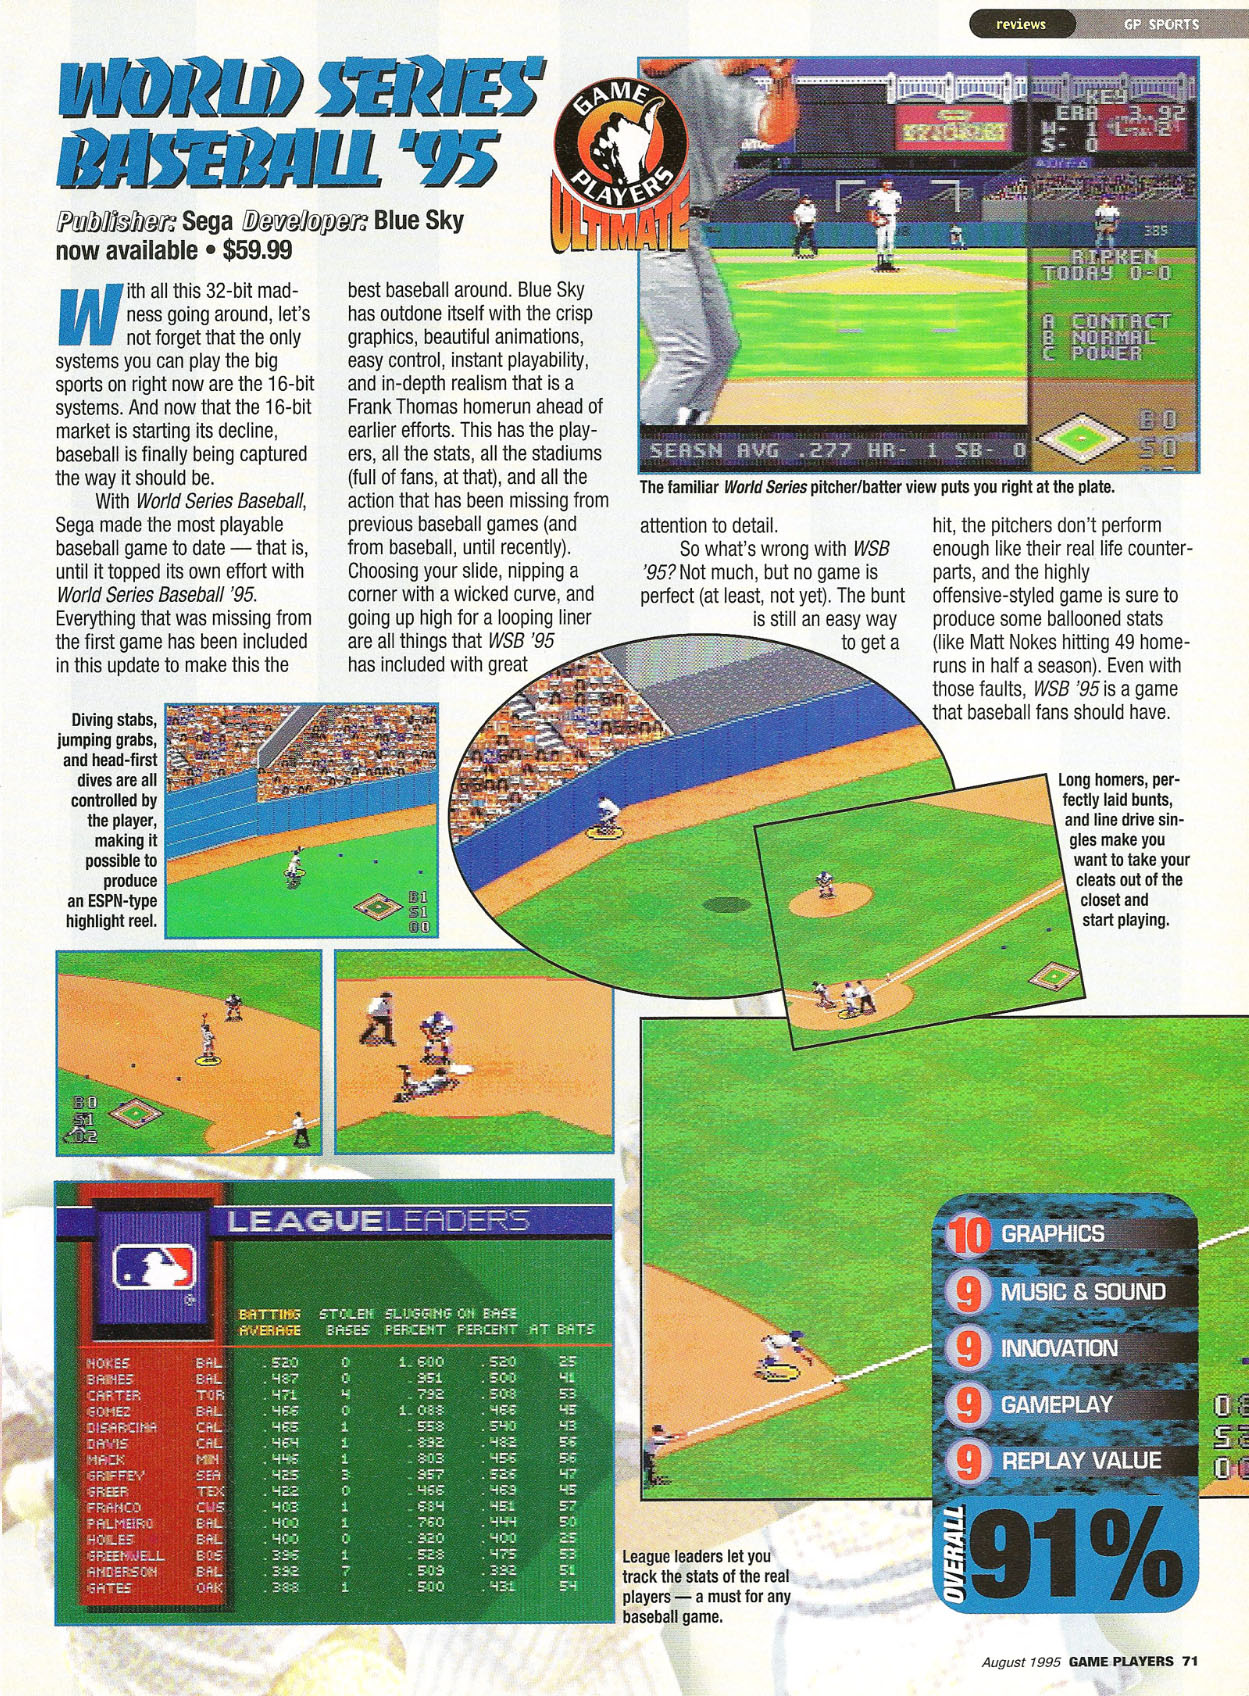 World Series Baseball '95 Review, Game Players August 1995 page 71